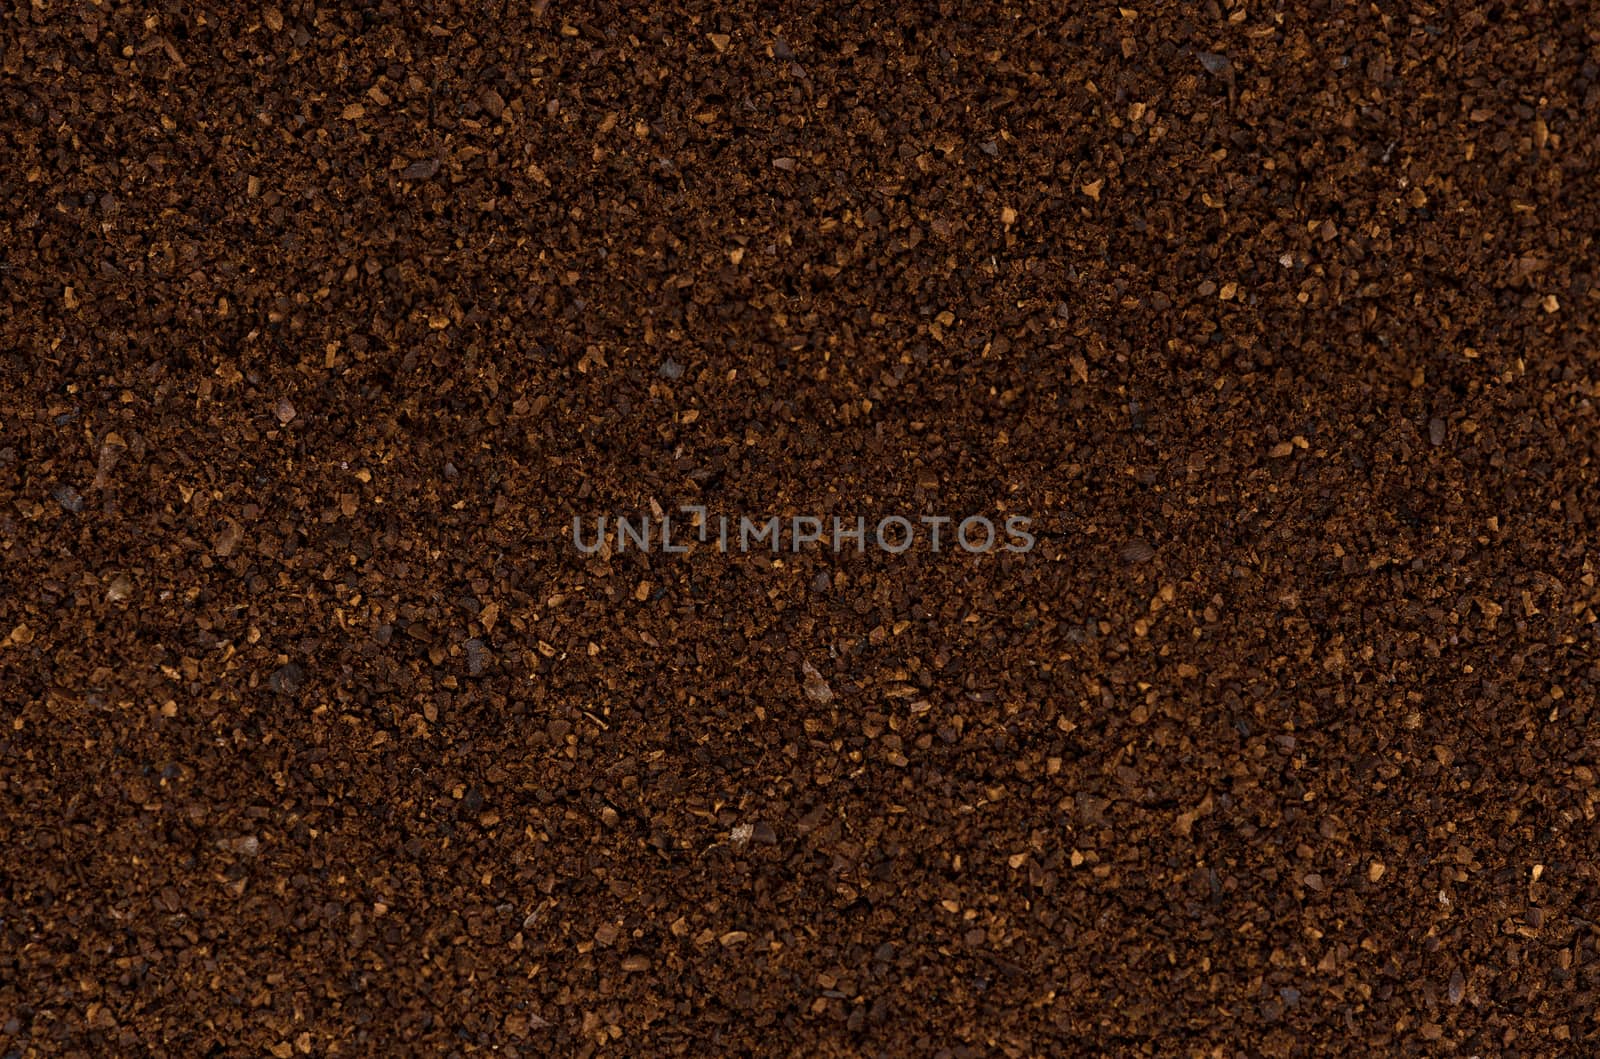 The texture of the ground coffee by DNKSTUDIO